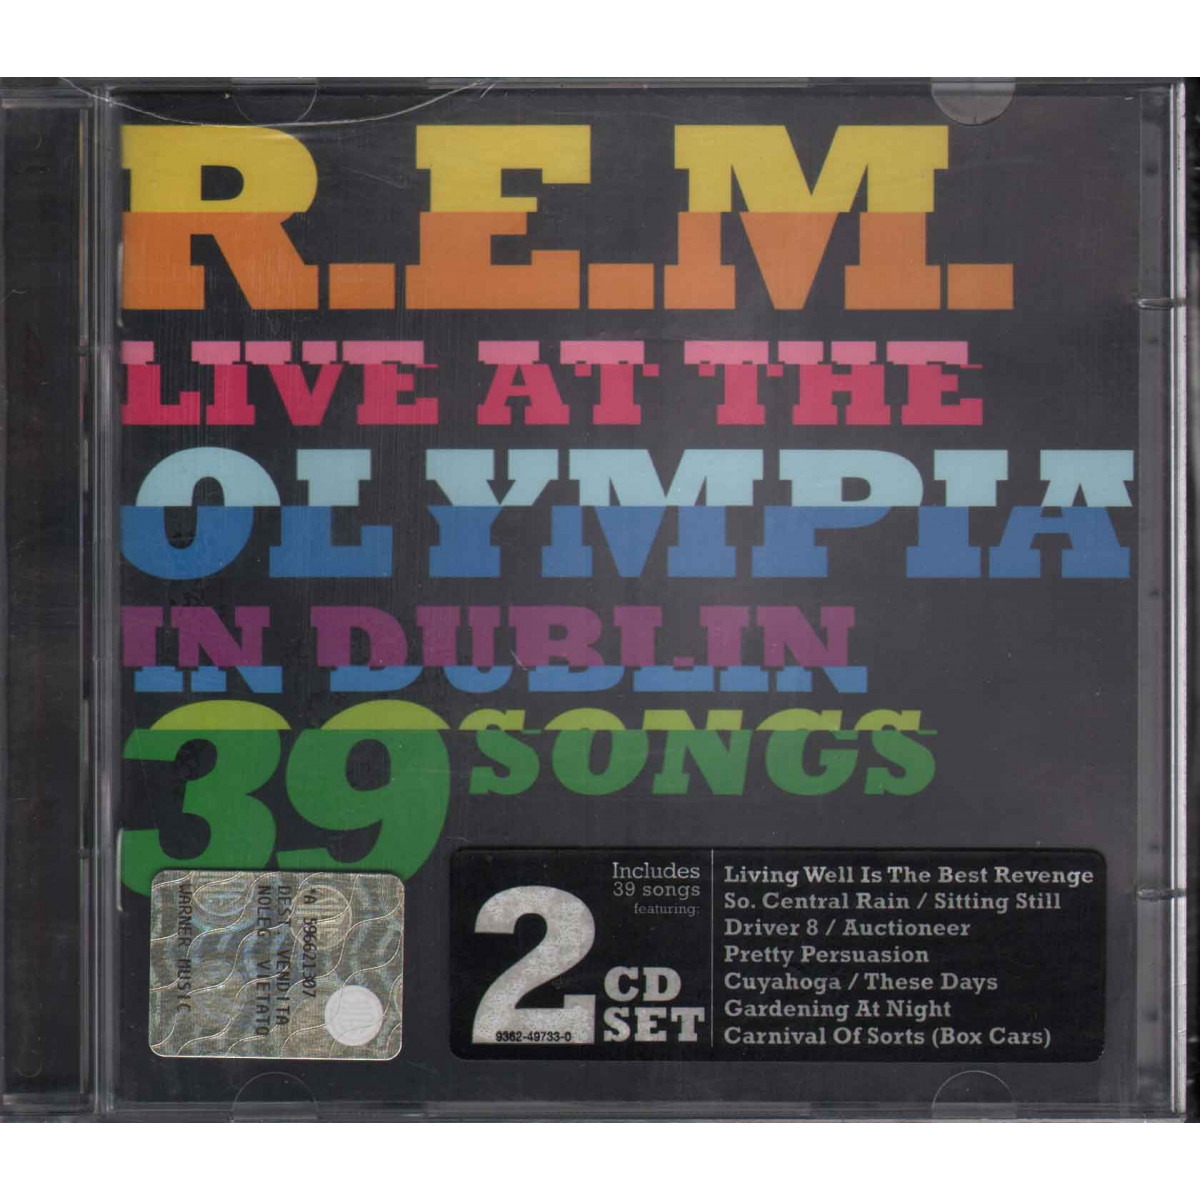 R.E.M. CD Live At The Olympia In Dublin 39 Songs / Warner 9362-49733-0